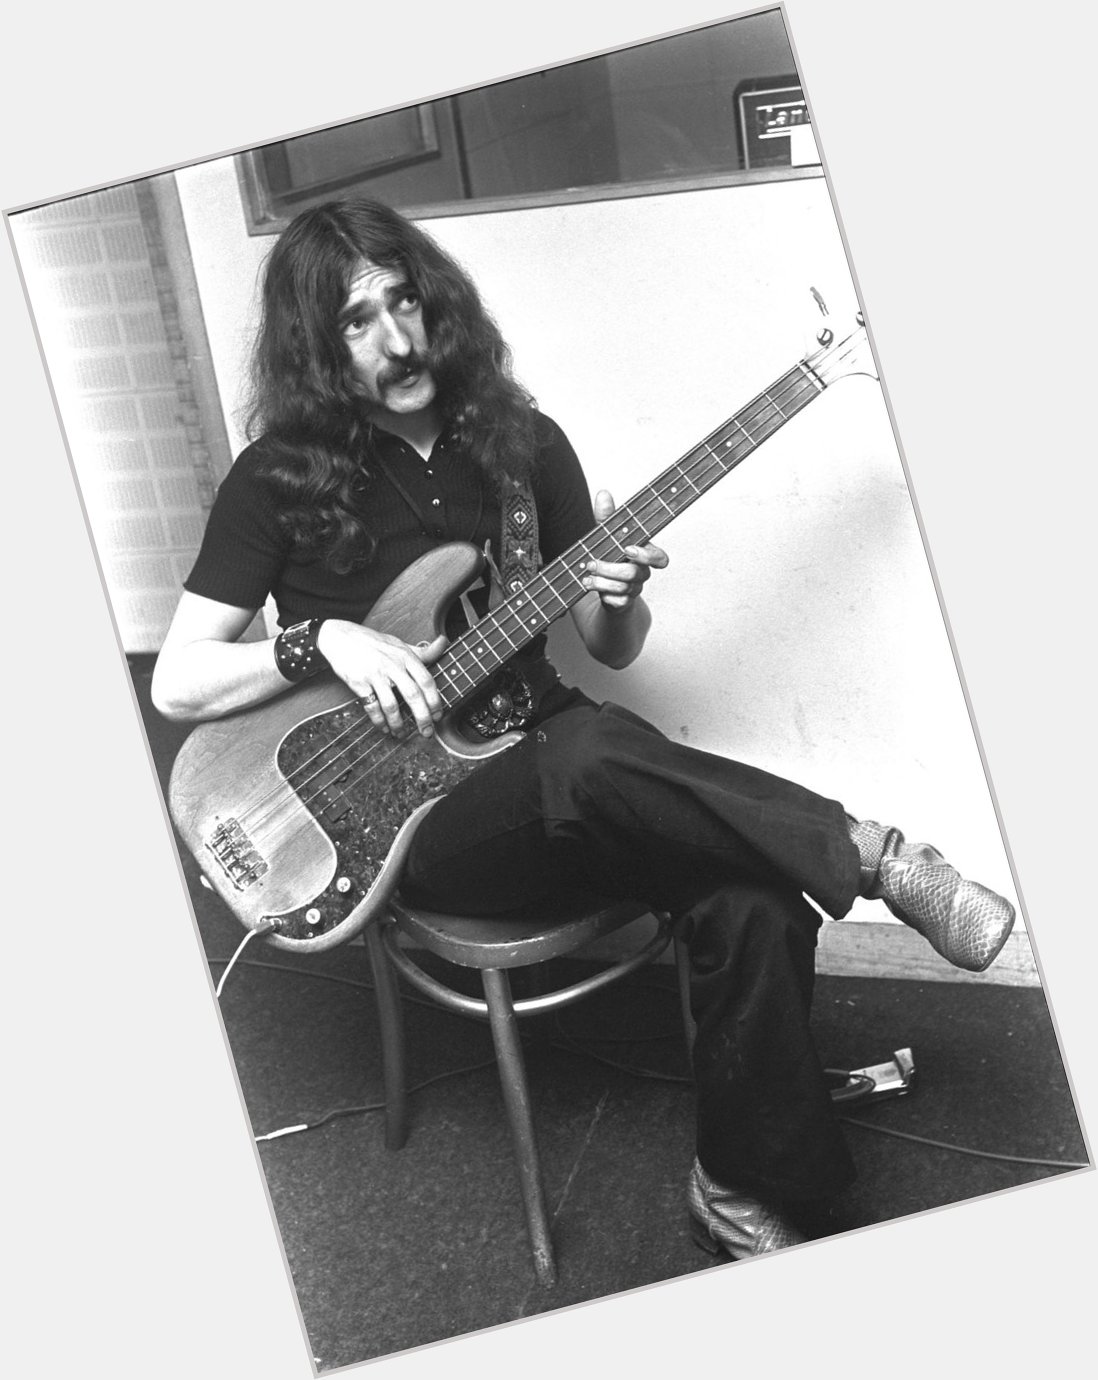 Happy 73rd birthday to the legendary Geezer Butler who was born on this day in 1949. 